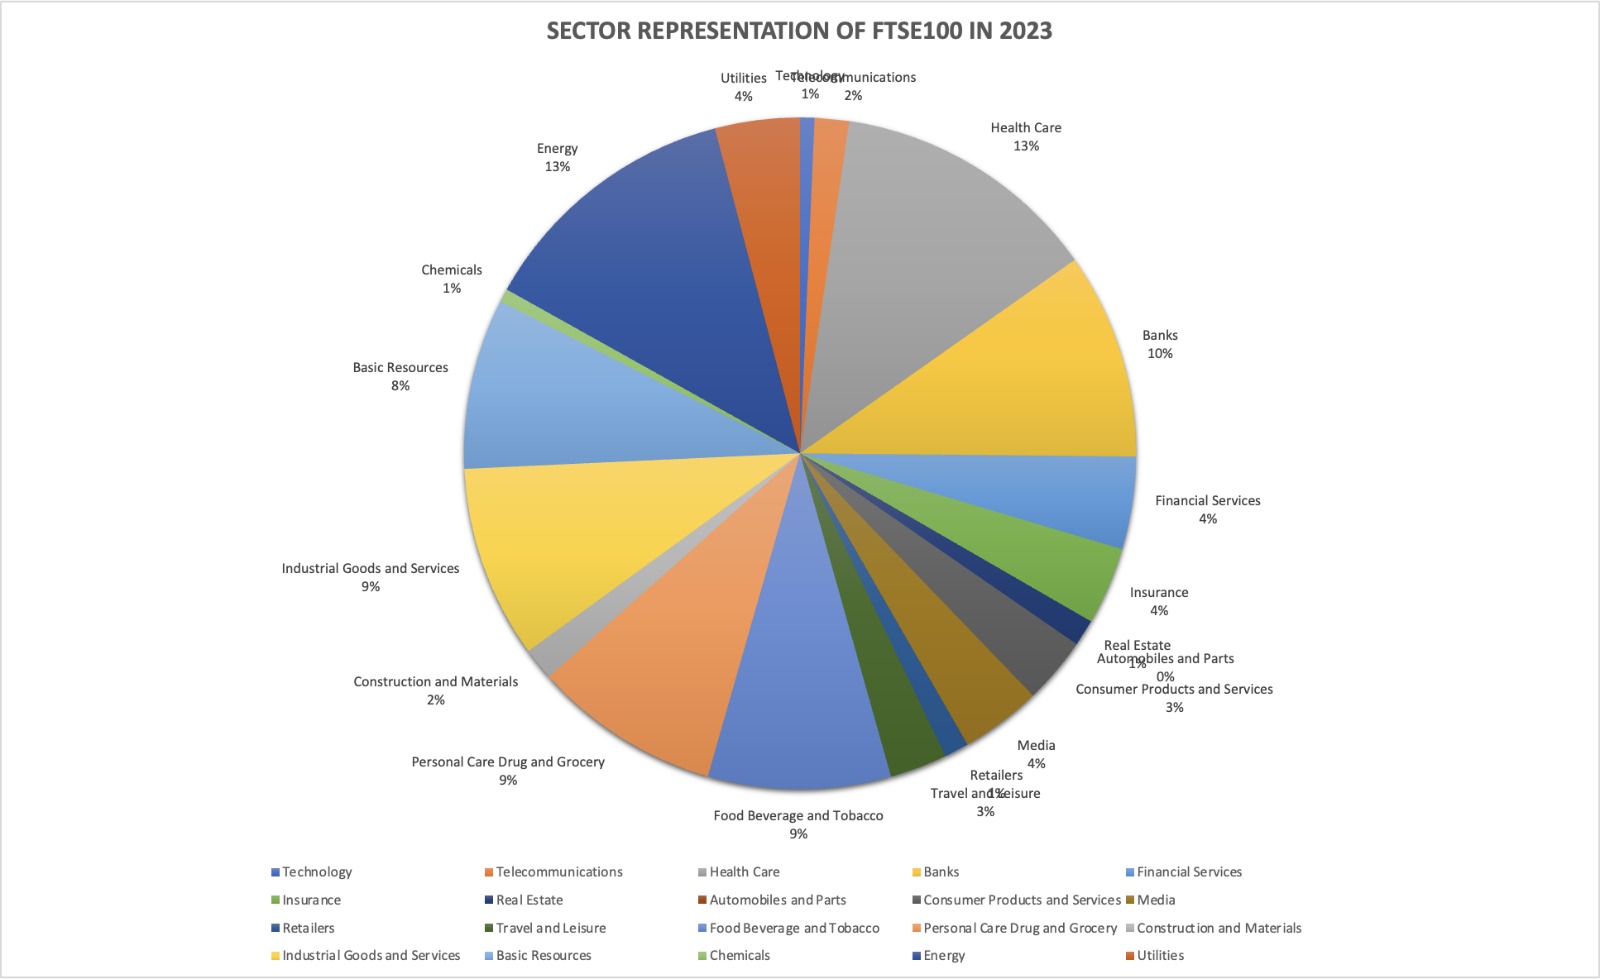 Sector representation in the FTSE 100 index